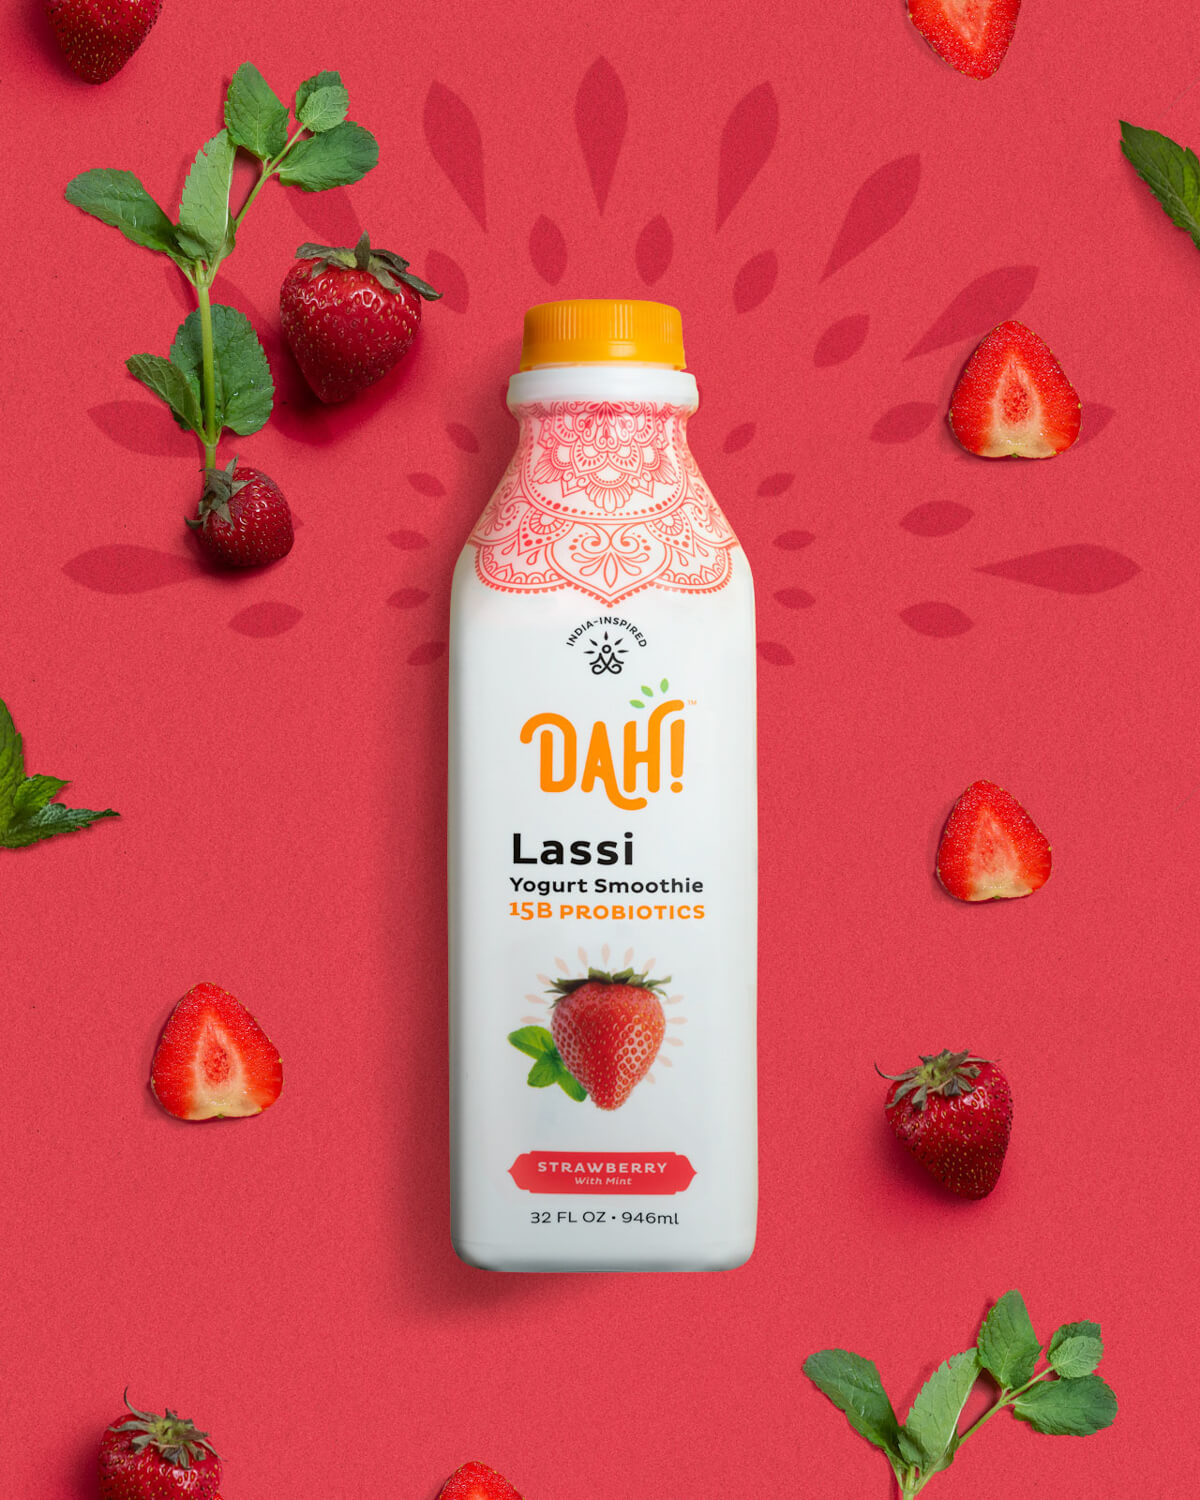 dah! strawberry with mint lassi yogurt smoothie surrounded by strawberries and mint leaves